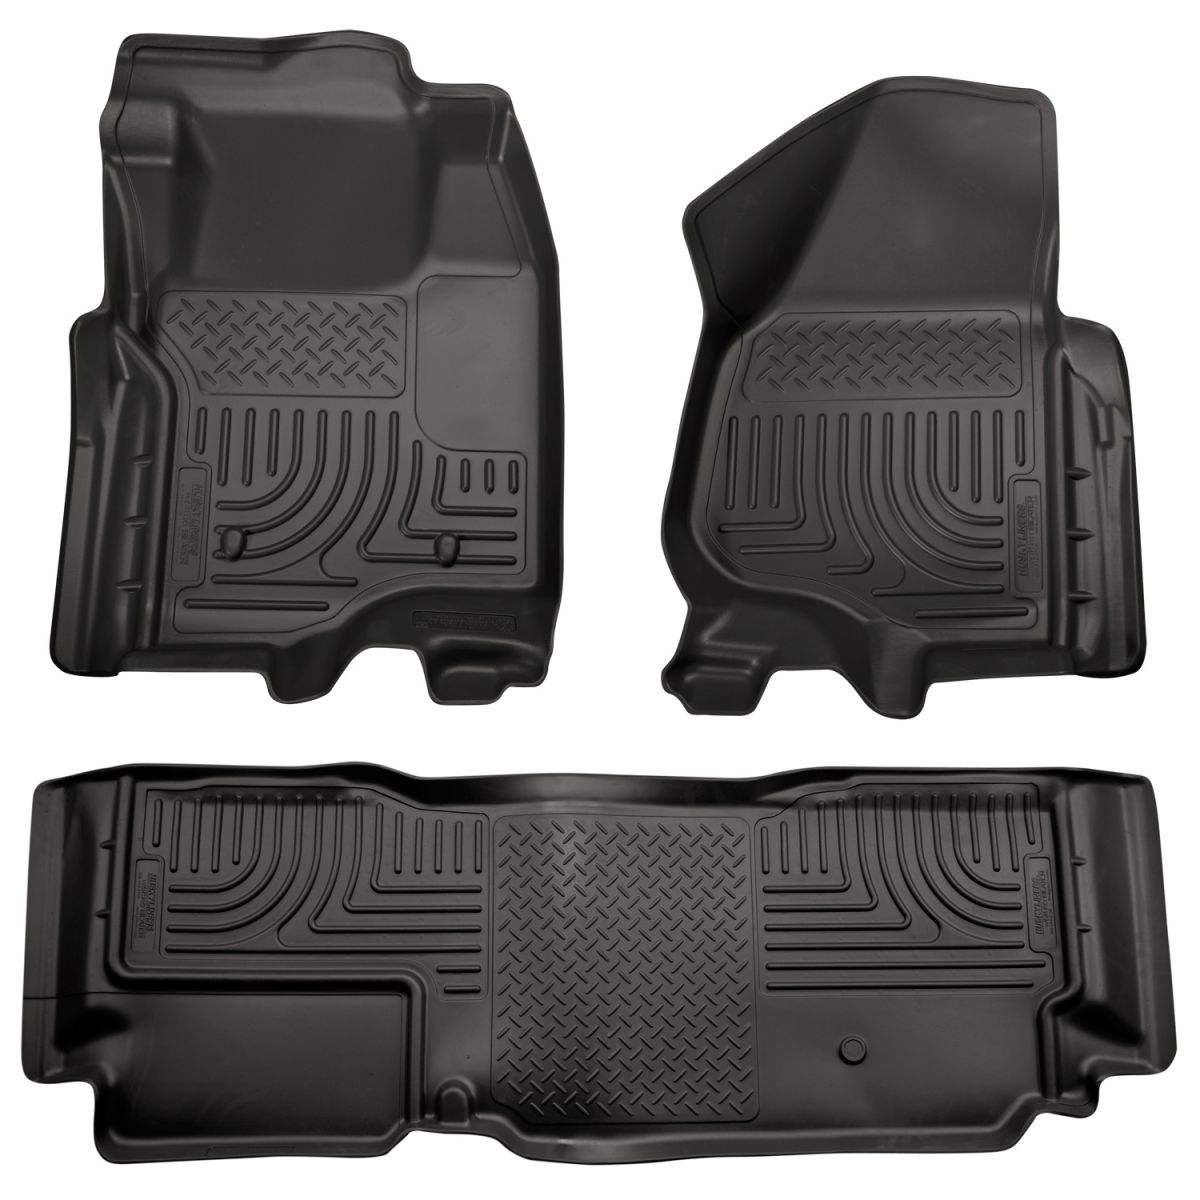 Husky Liners - Husky Liners Floor Liners Front & 2nd Row 11-12 F Series Super Duty Super Cab (Footwell Coverage) WeatherBeater-Black 98721